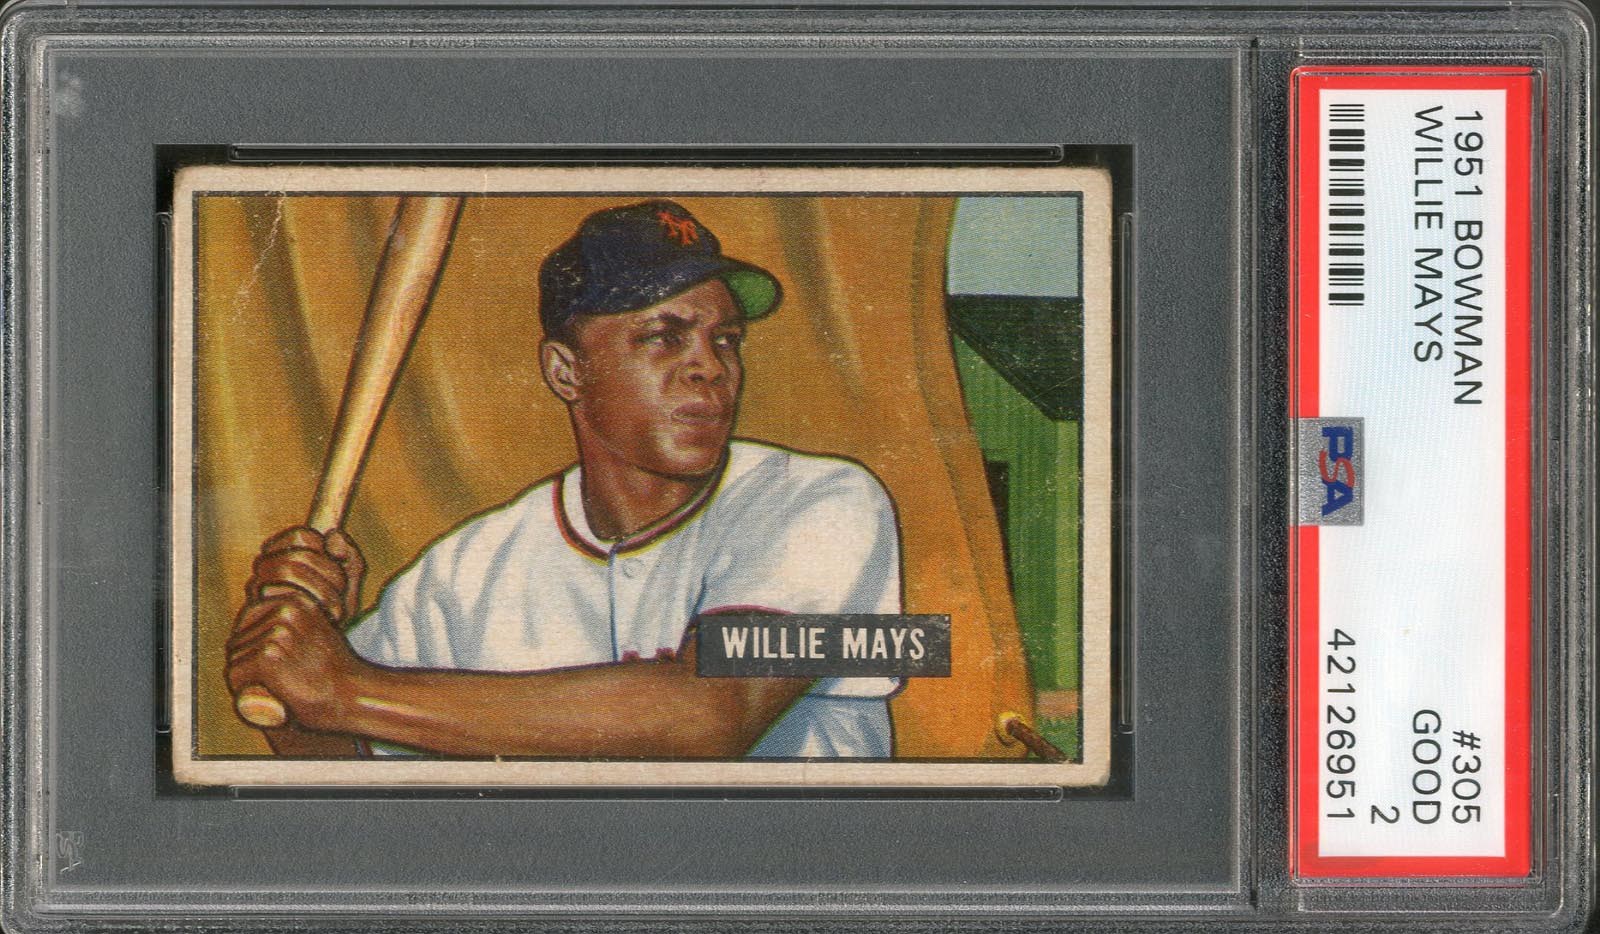 Baseball and Trading Cards - 1951 Bowman #305 Willie Mays Rookie (PSA Good 2)